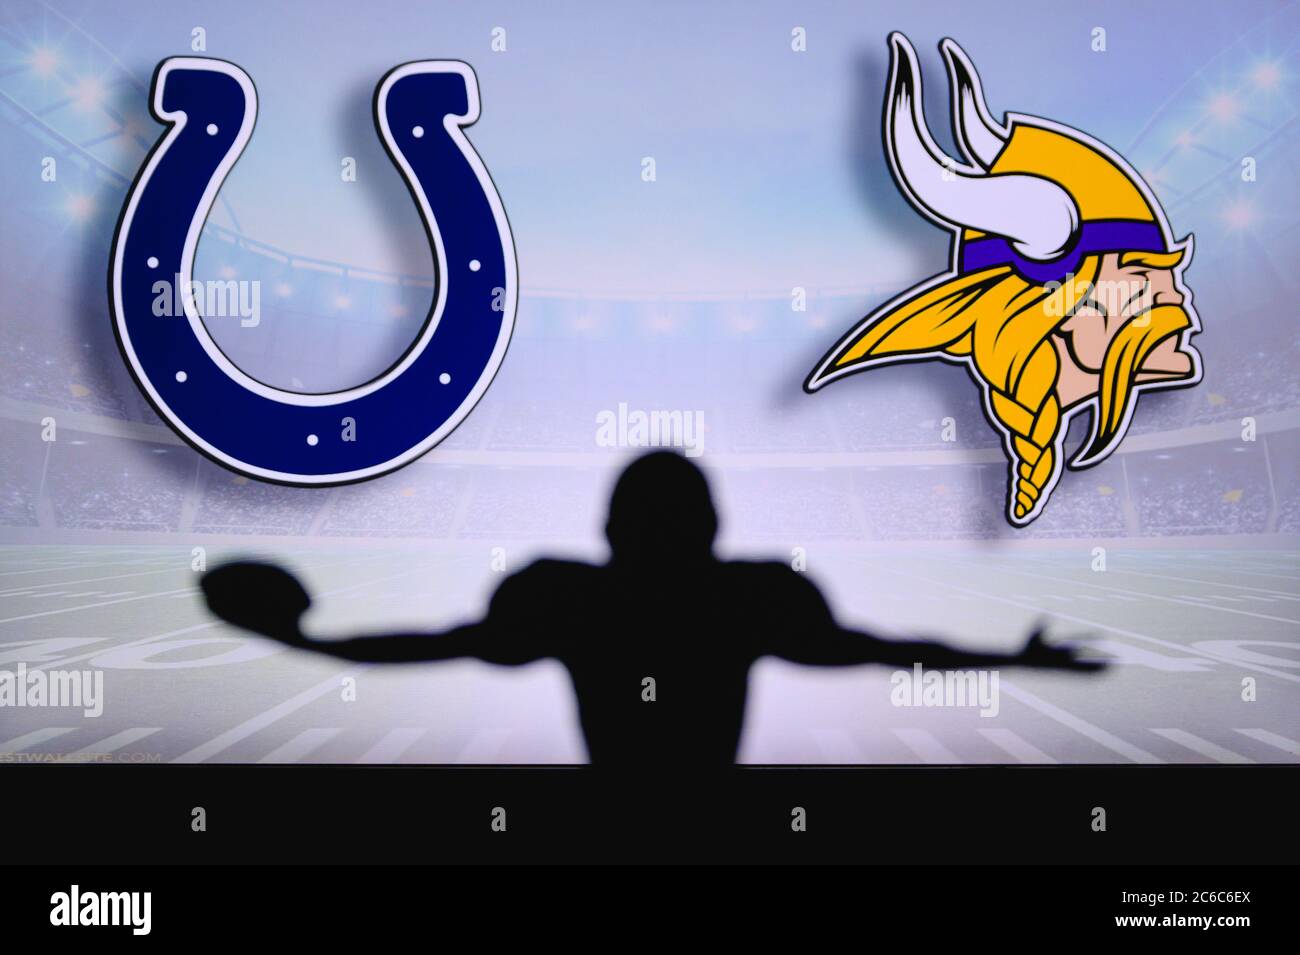 vikings against the colts